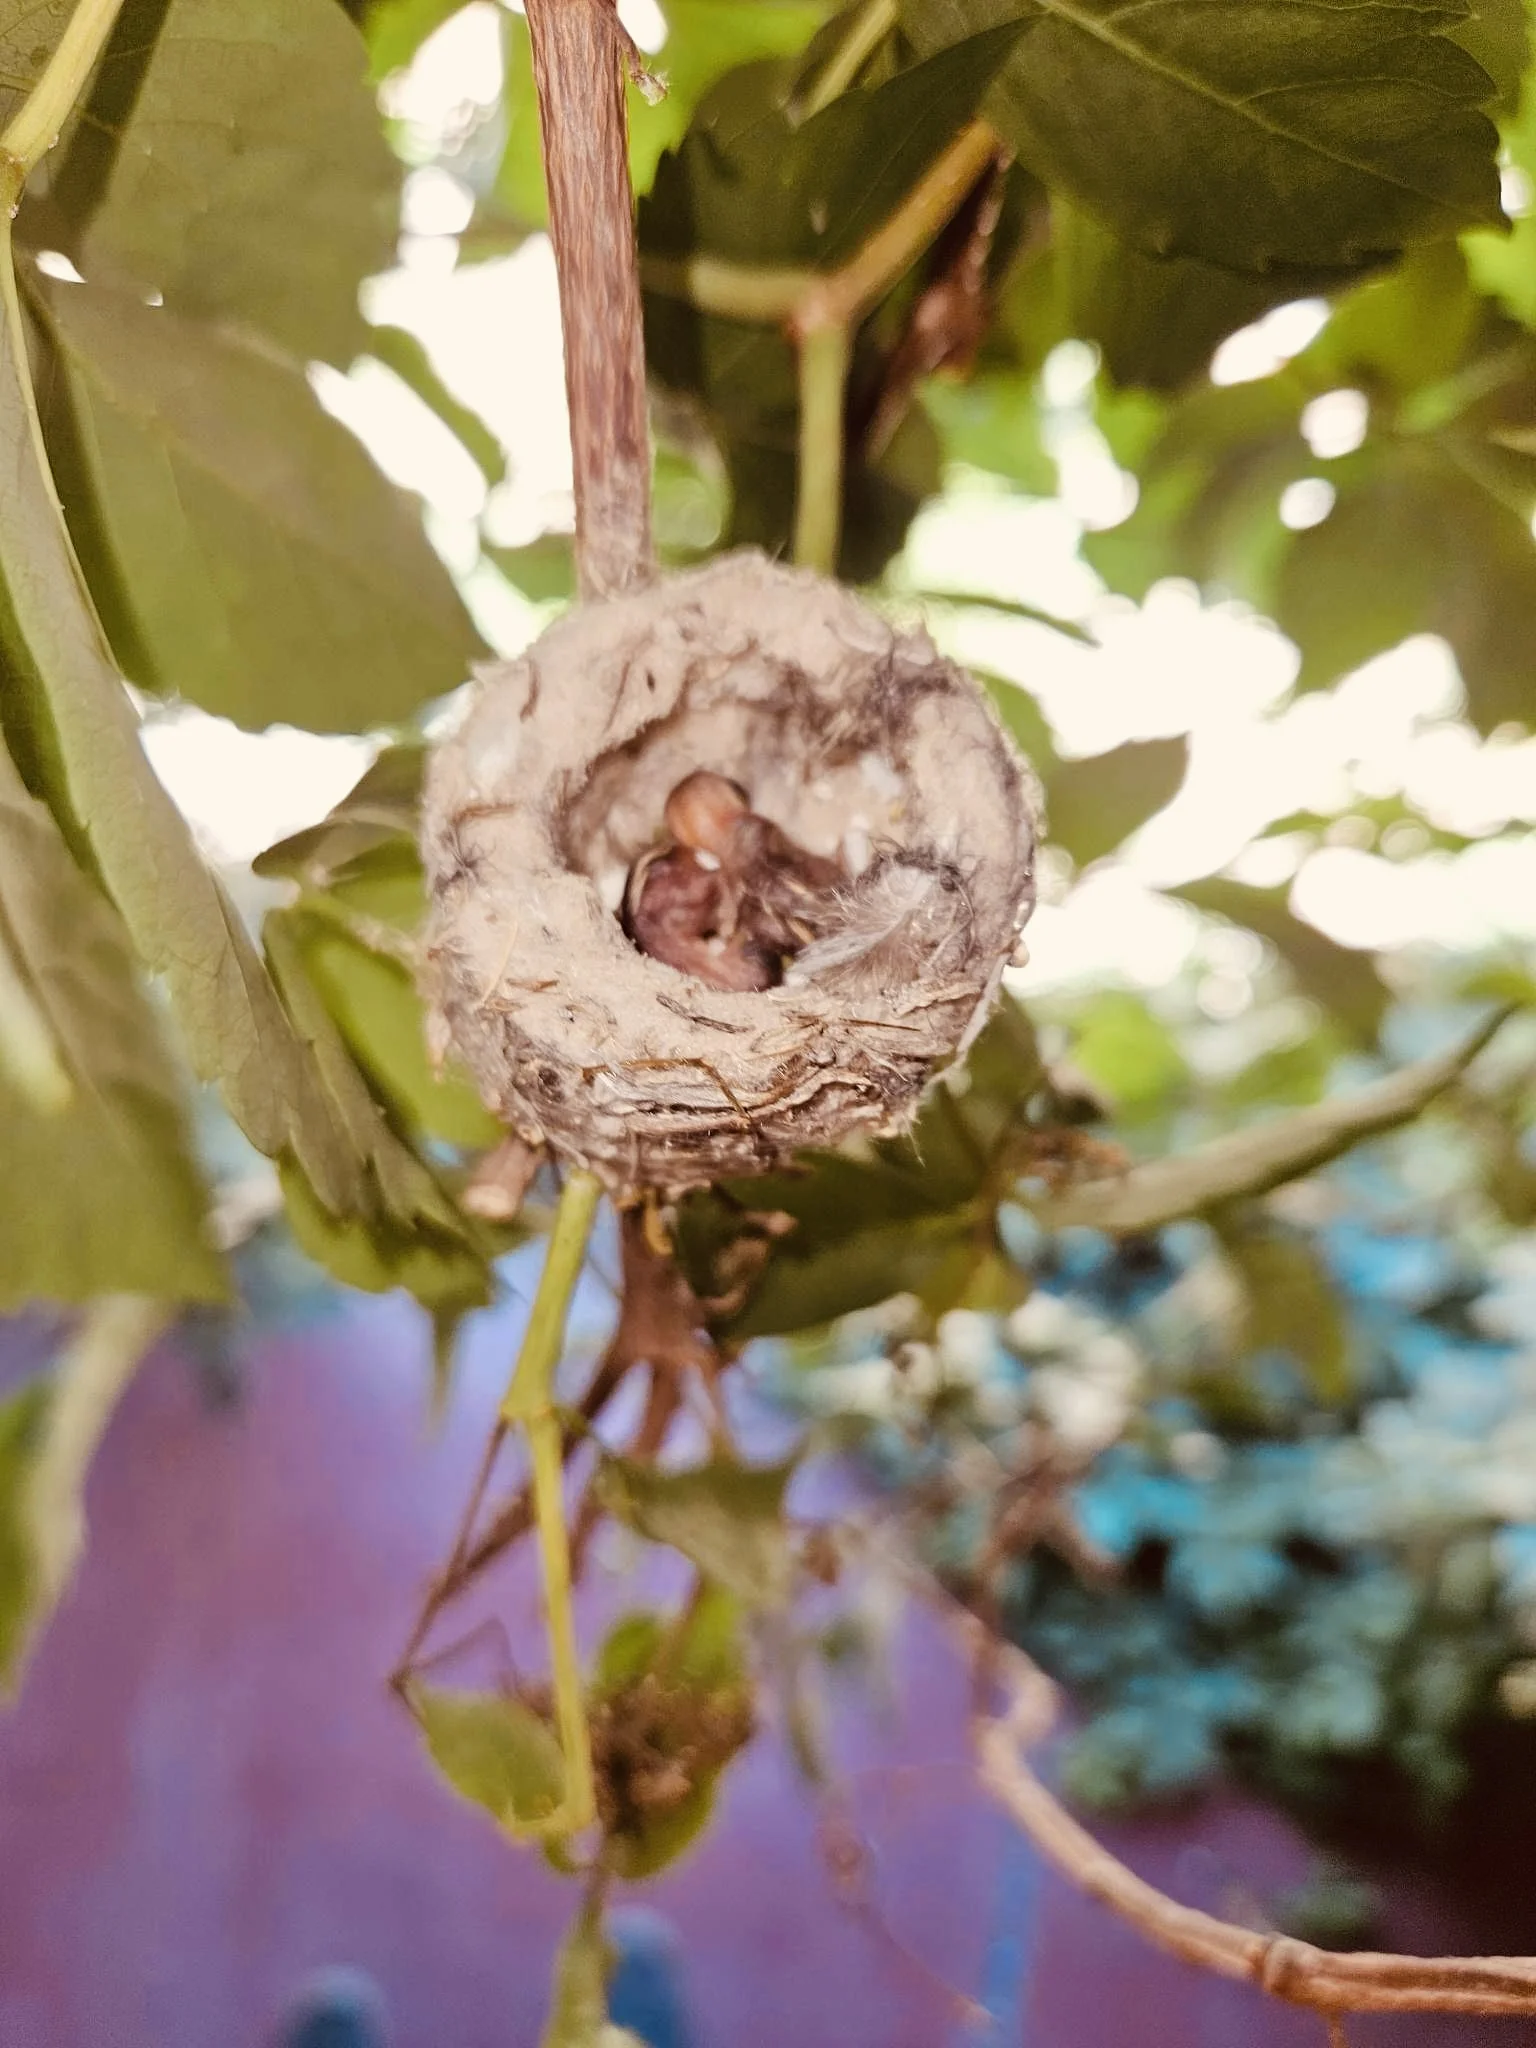 A humming bird nest with baby humming birds inside.